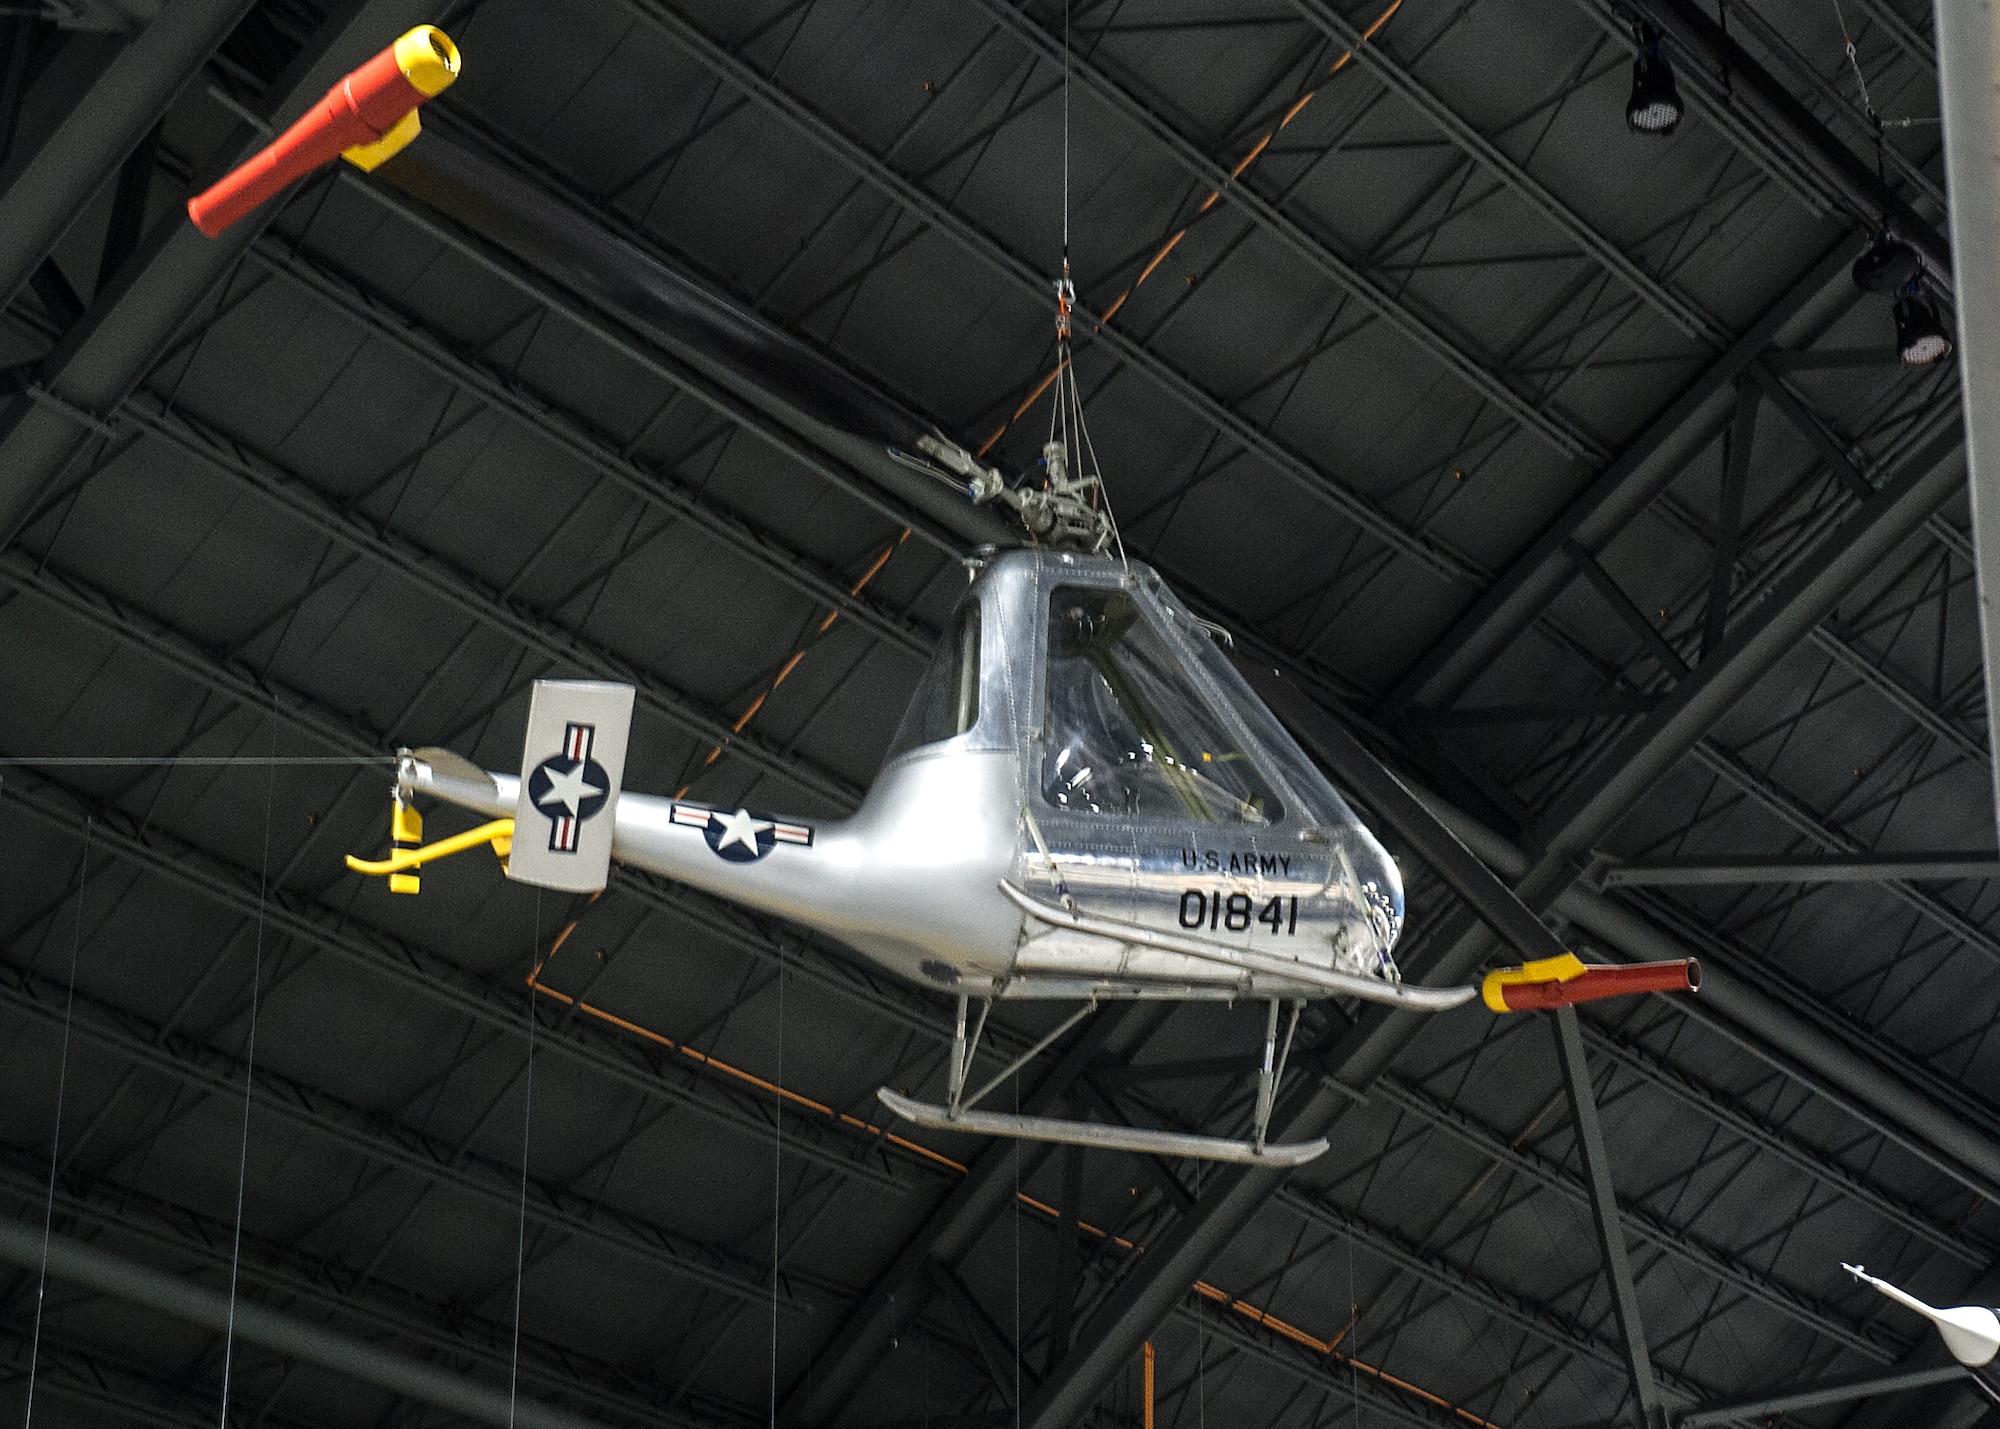 American Helicopter Co. XH-26 Jet Jeep in the Research & Development Gallery at the National Museum of the U.S. Air Force on December 28, 2015. (U.S. Air Force photo)